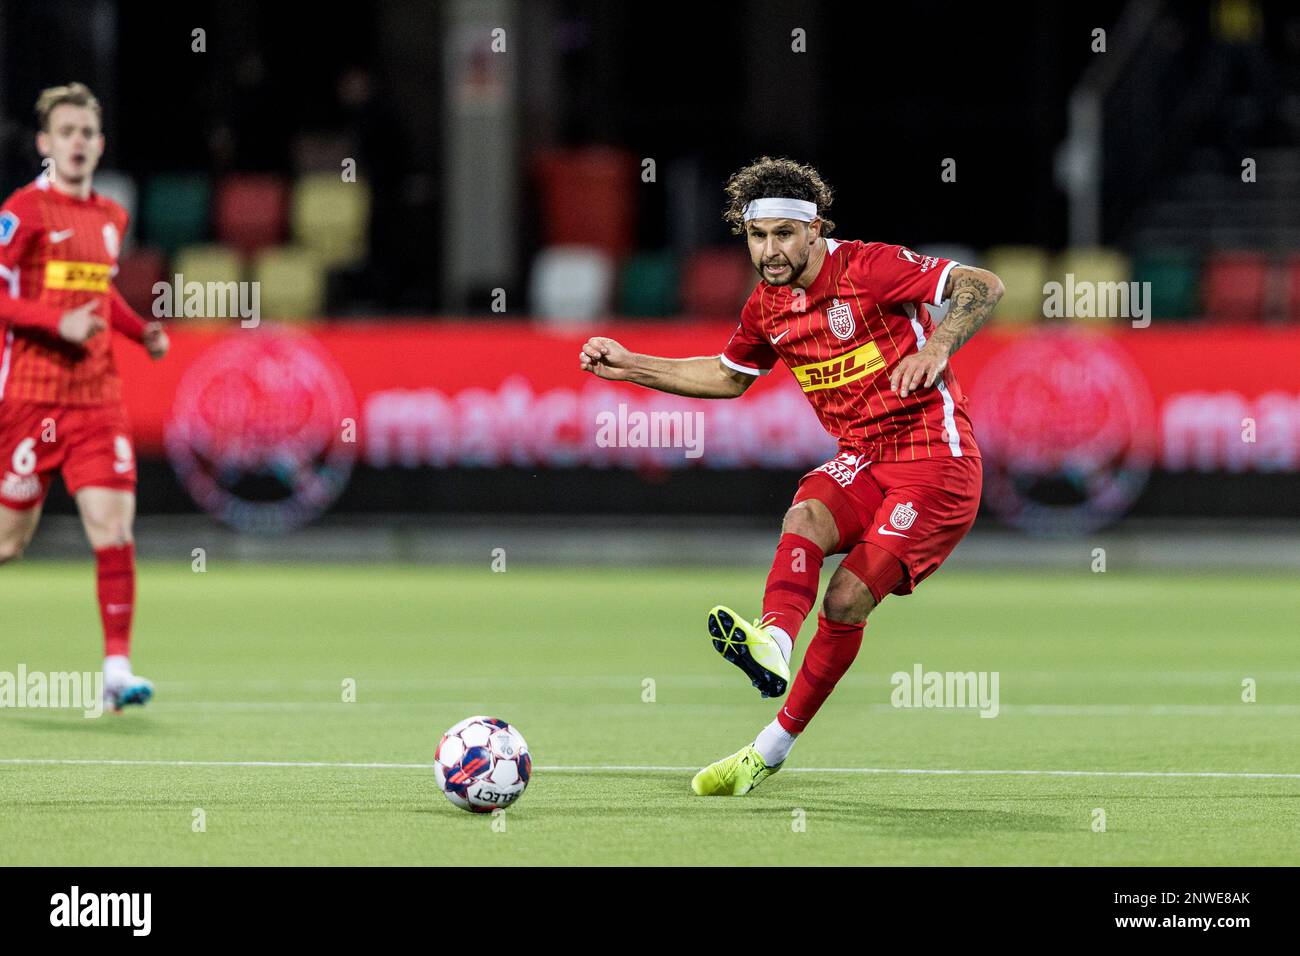 Silkeborg, Denmark. 28th Feb, 2023. Emiliano Marcondes (8) of FC Nordsjaelland seen during the DBU Cup match between Aarhus Fremad and FC at JYSK Park in Silkeborg. (Photo Credit: Gonzales Photo/Alamy